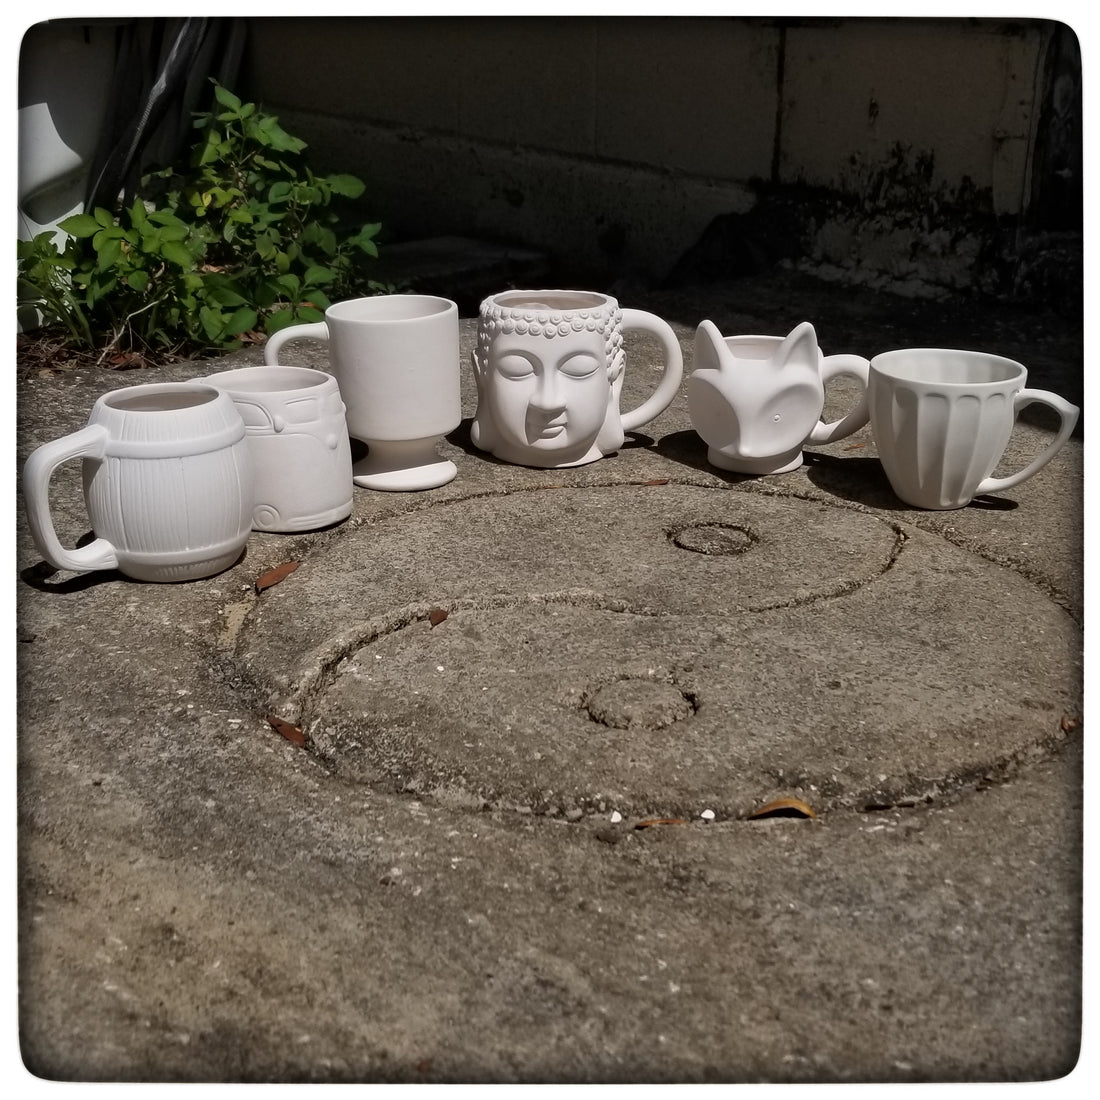 The rest of the Mugs of the Month, 2019